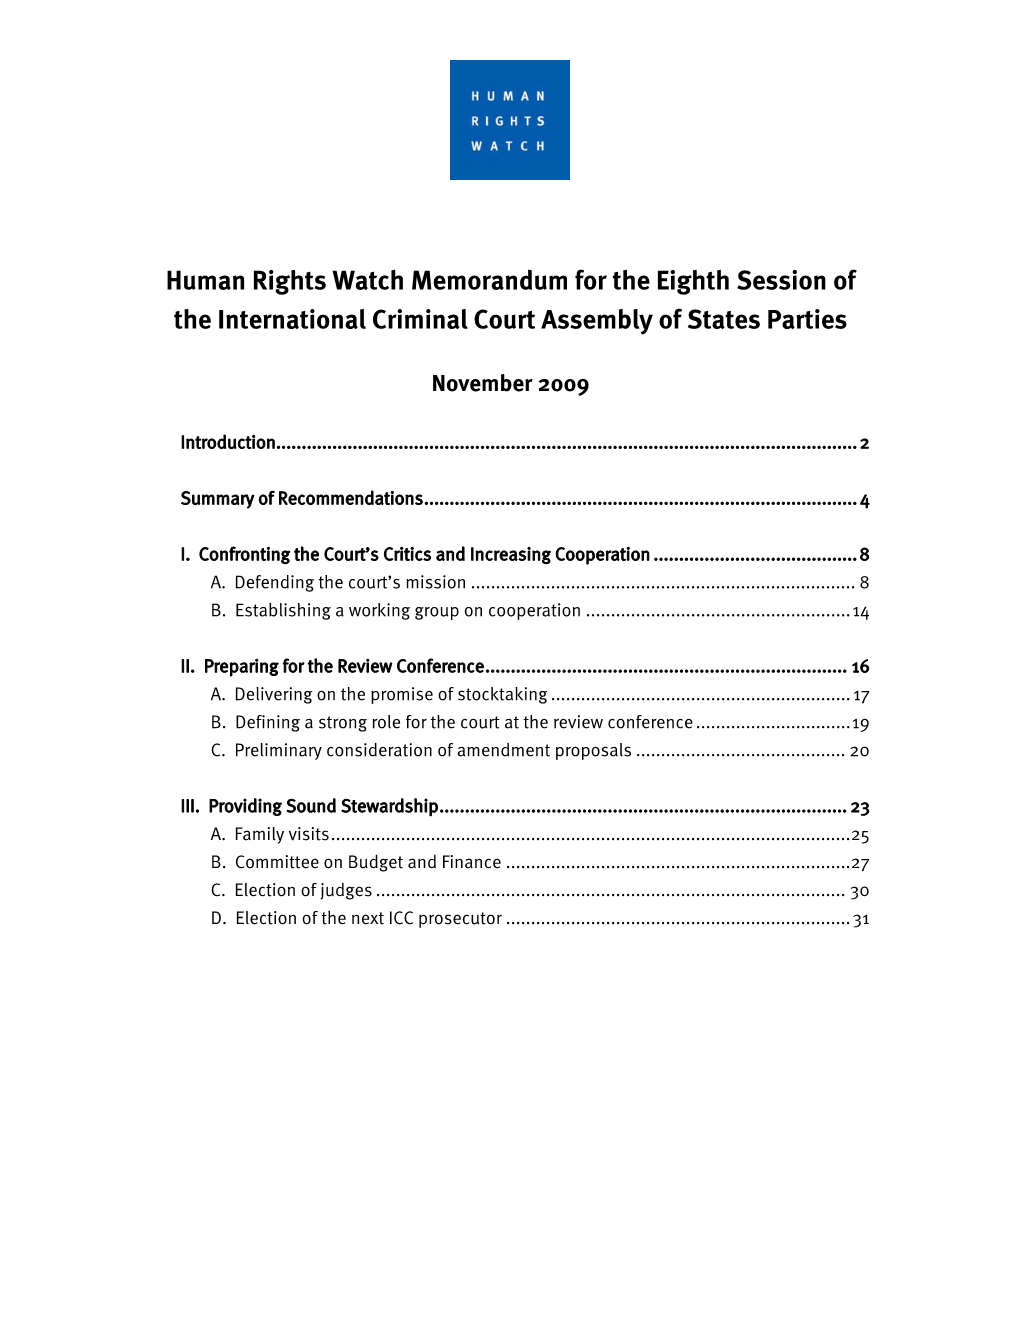 Human Rights Watch Memorandum for the Eighth Session of the International Criminal Court Assembly of States Parties